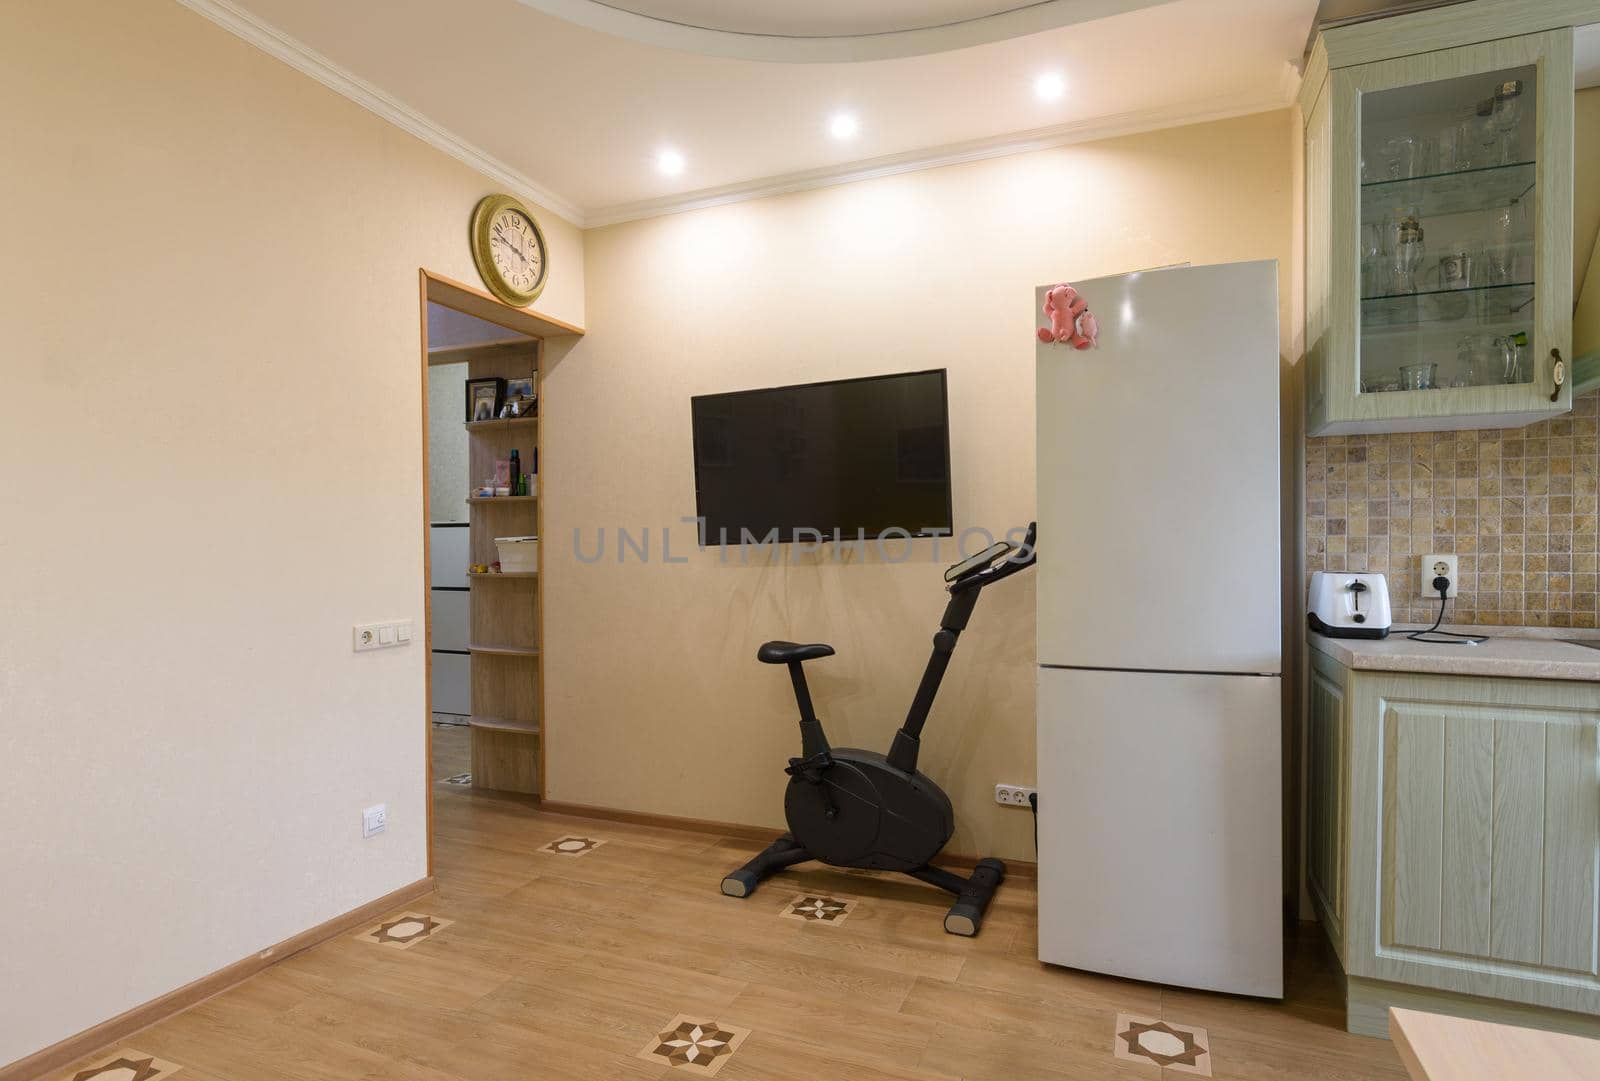 A fragment of the interior of the living room combined with the kitchen, a TV hangs on the wall, an exercise bike and a refrigerator are located nearby